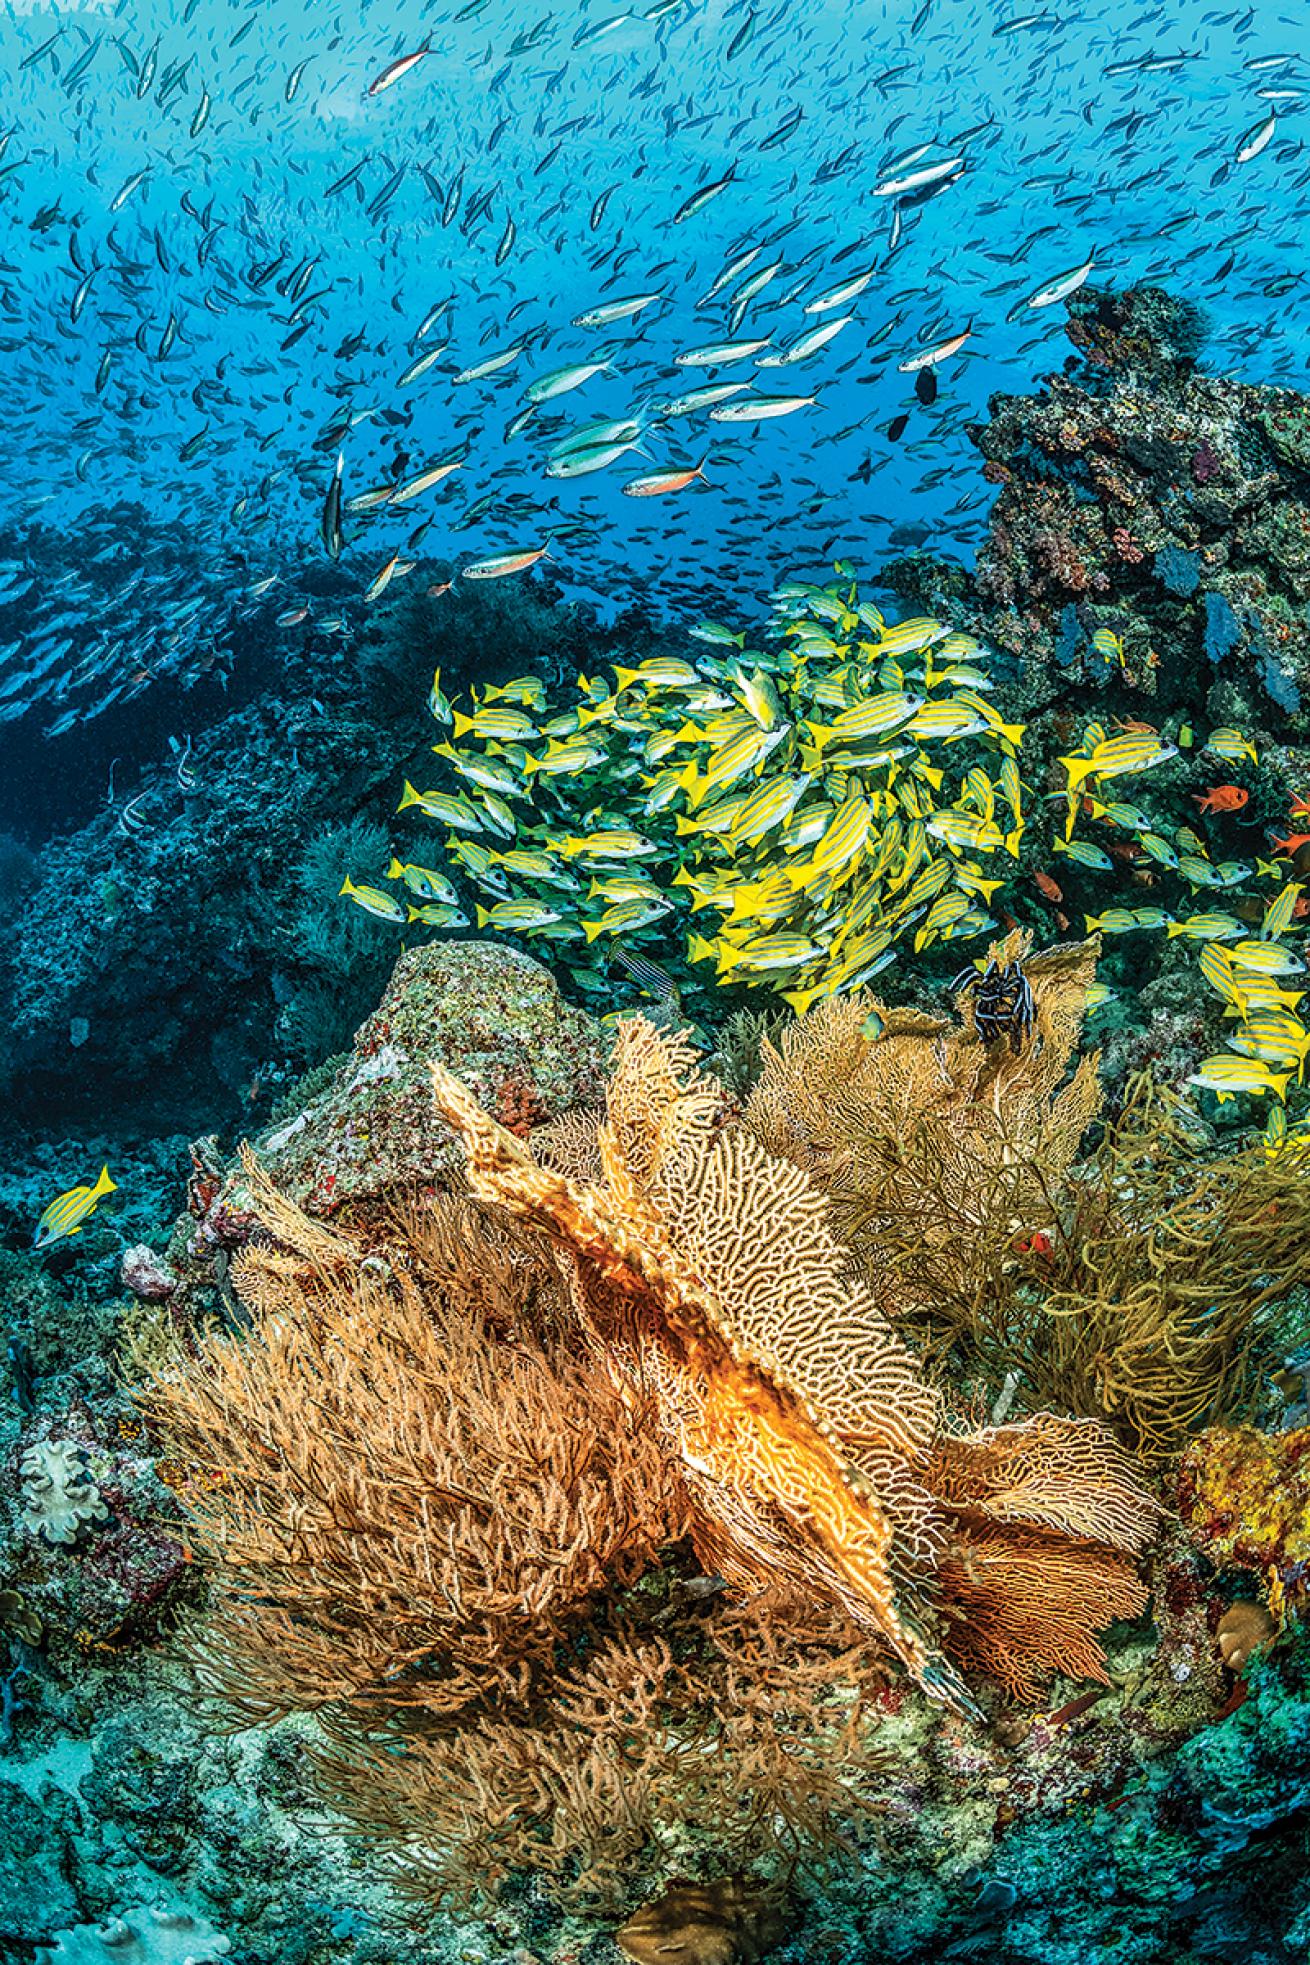 Small grey fish and small, stripped, yellow fish collect over tan coral fans